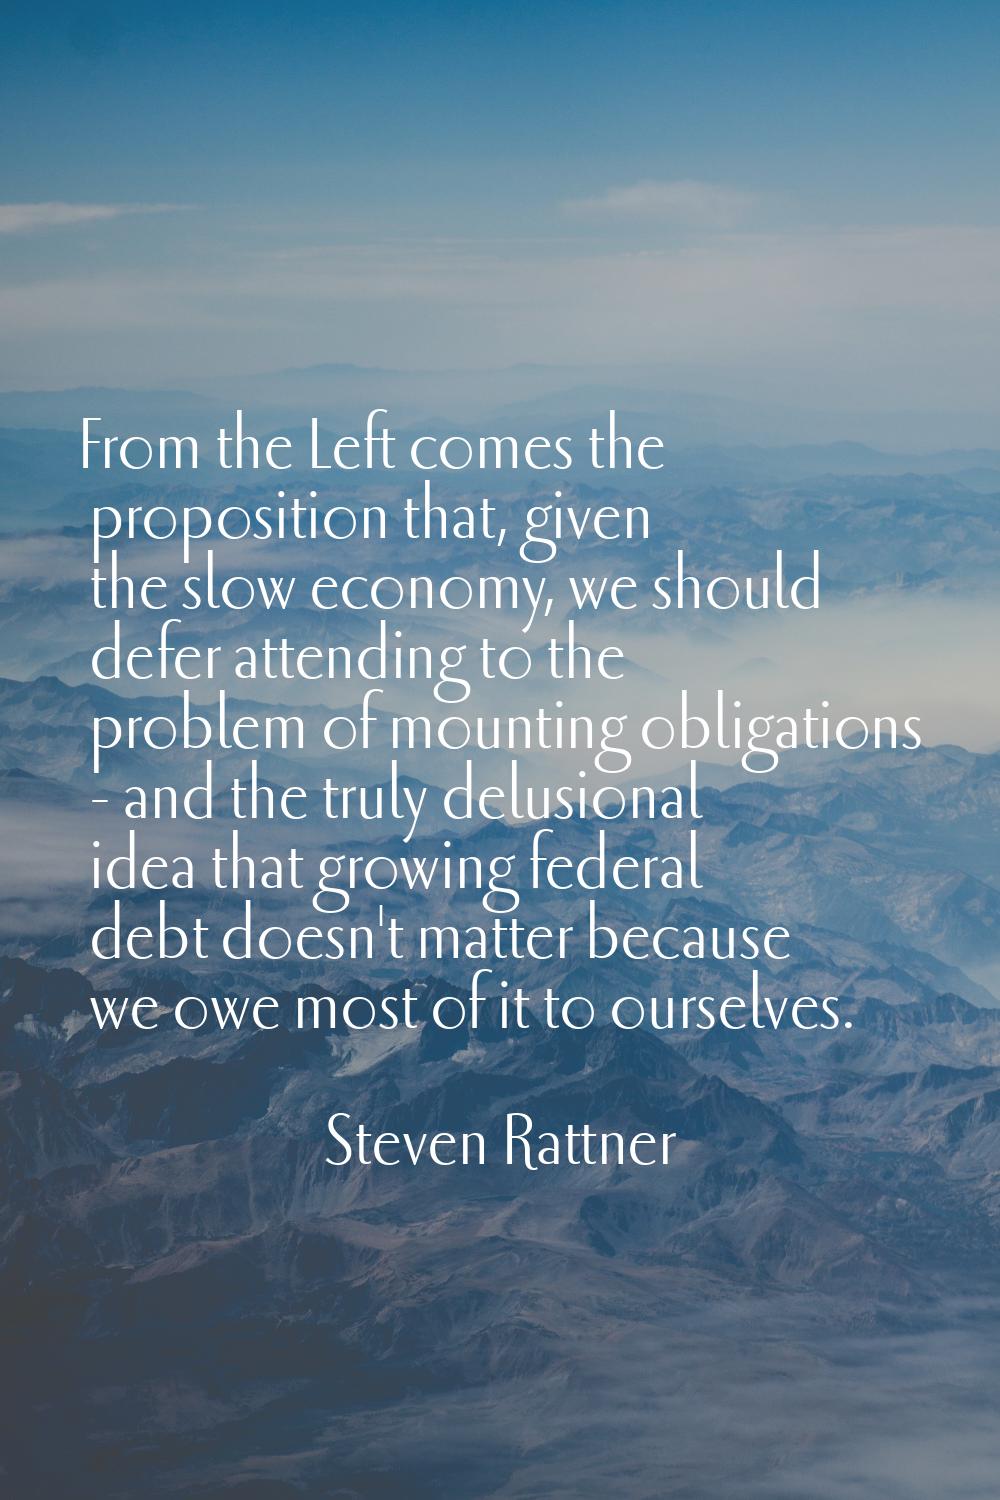 From the Left comes the proposition that, given the slow economy, we should defer attending to the 